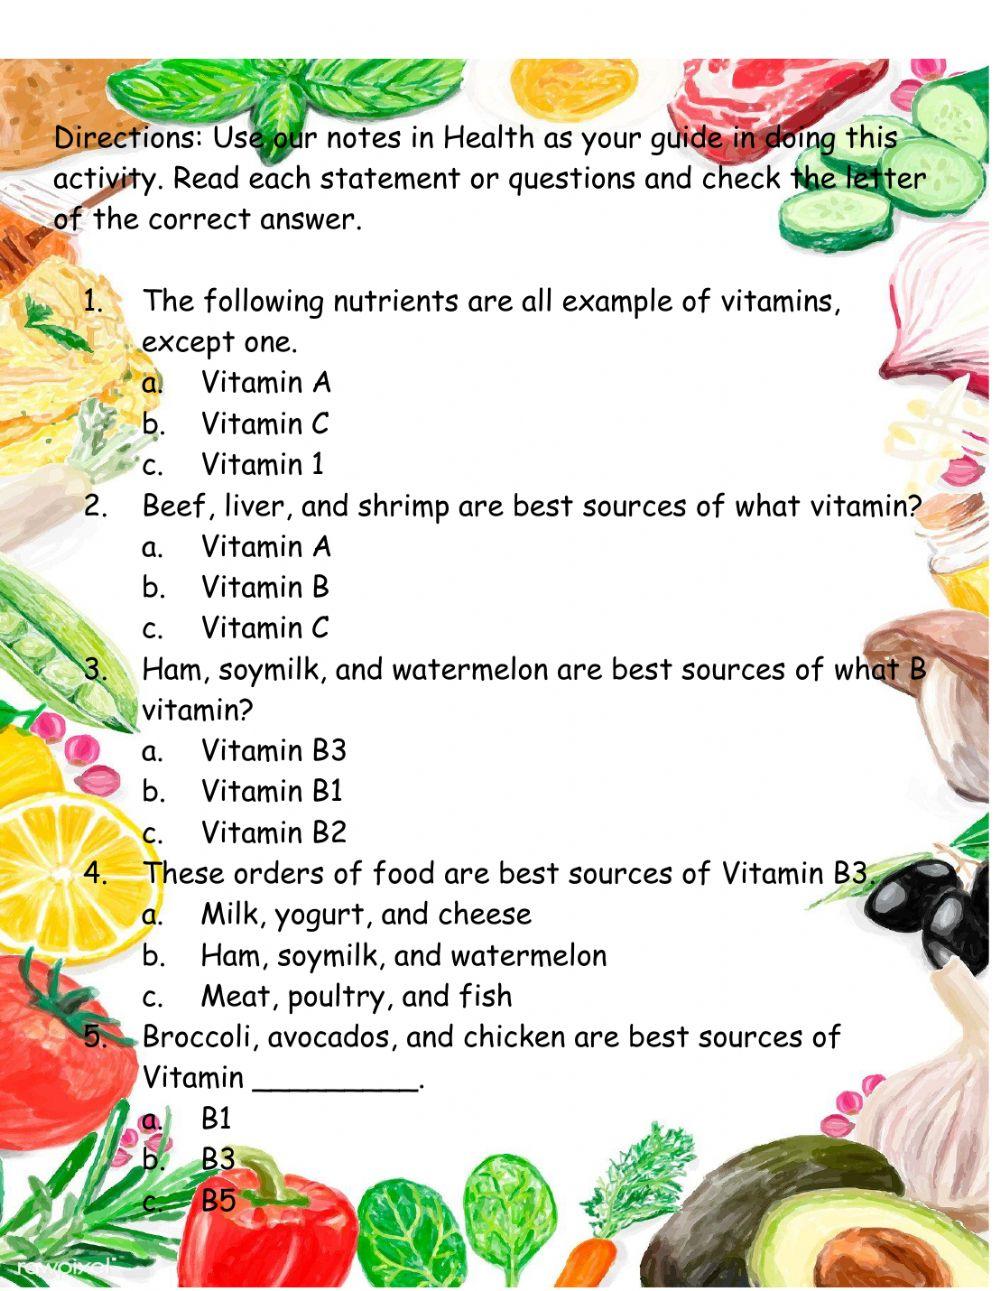 Sources of Vitamins